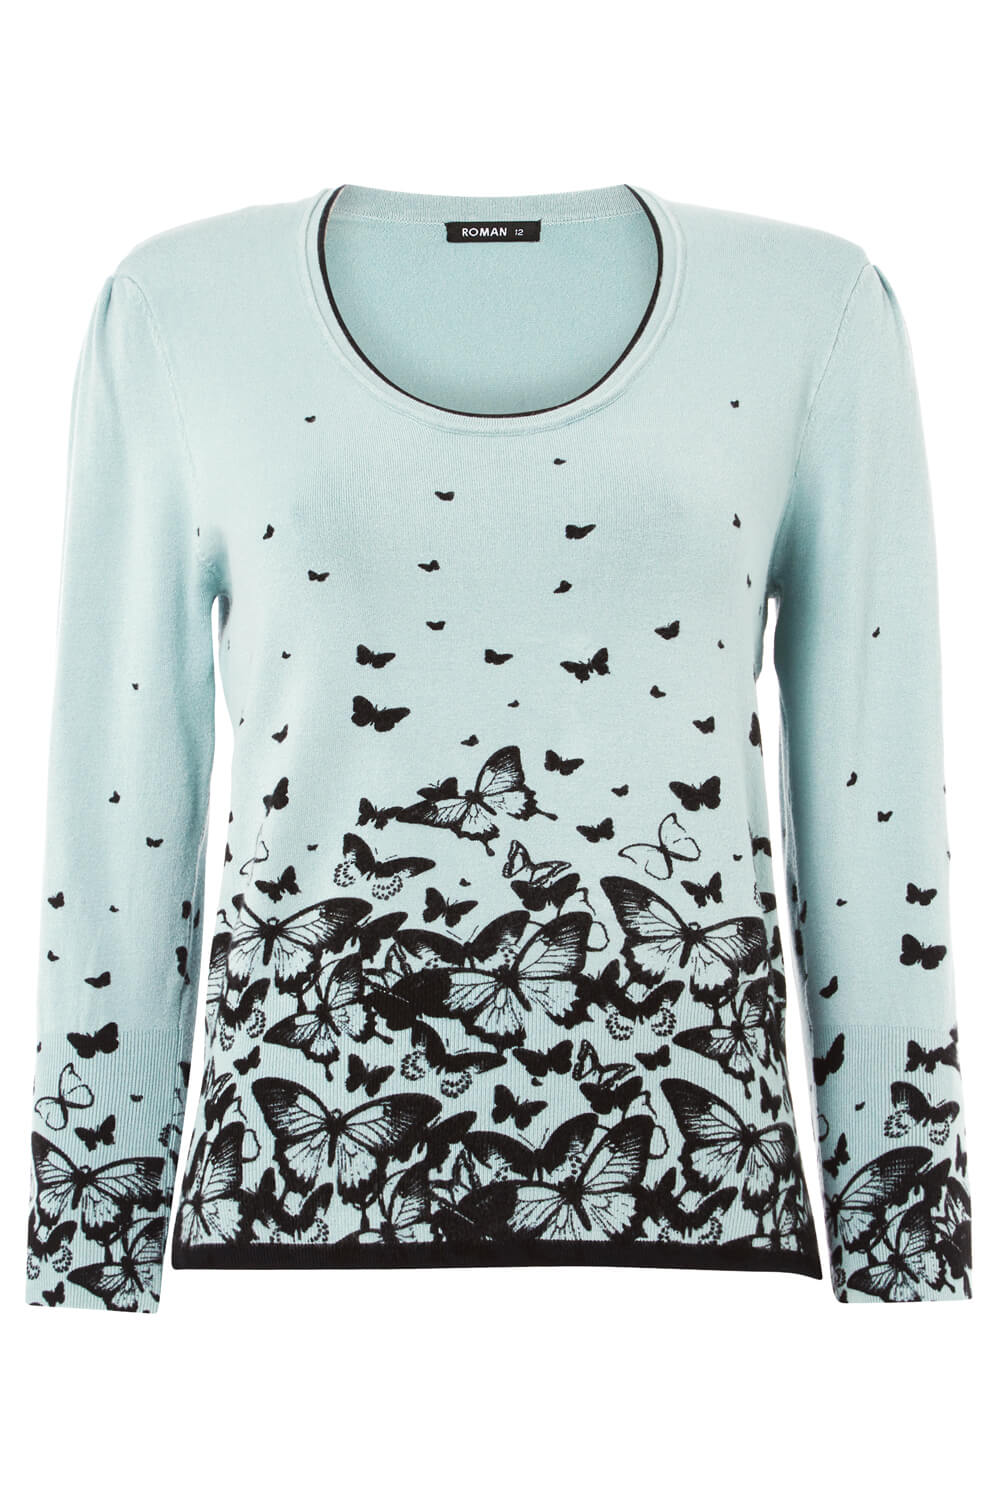 Mint Butterfly Print Jumper, Image 5 of 5